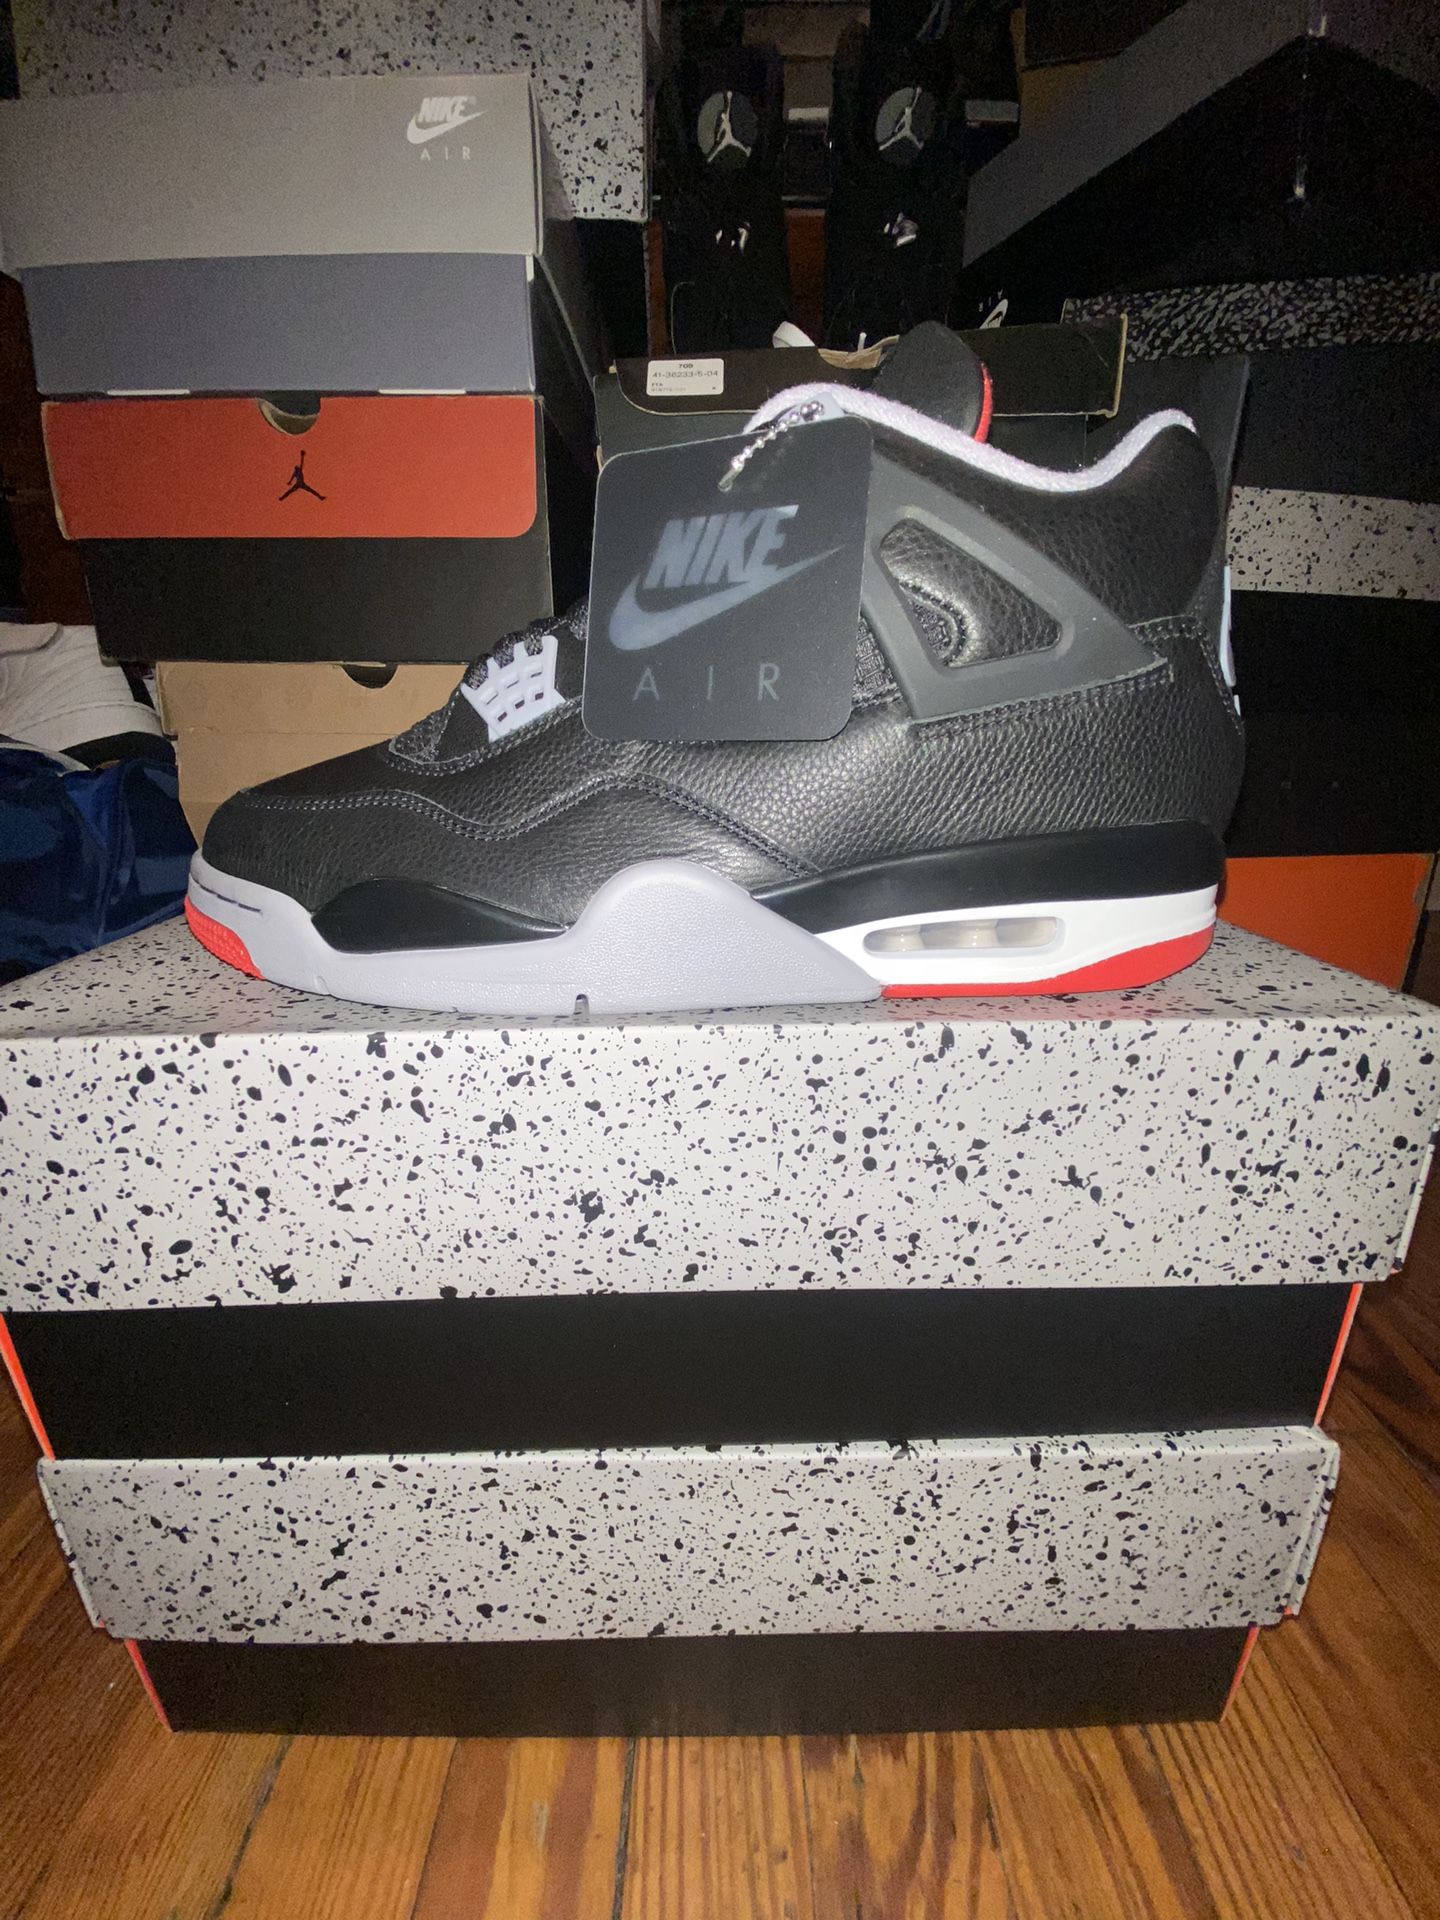 Air Jordan 4 Black/Fire Red-Cement Grey Size 11 DS And A Size 10.5 DS NEW read the description below